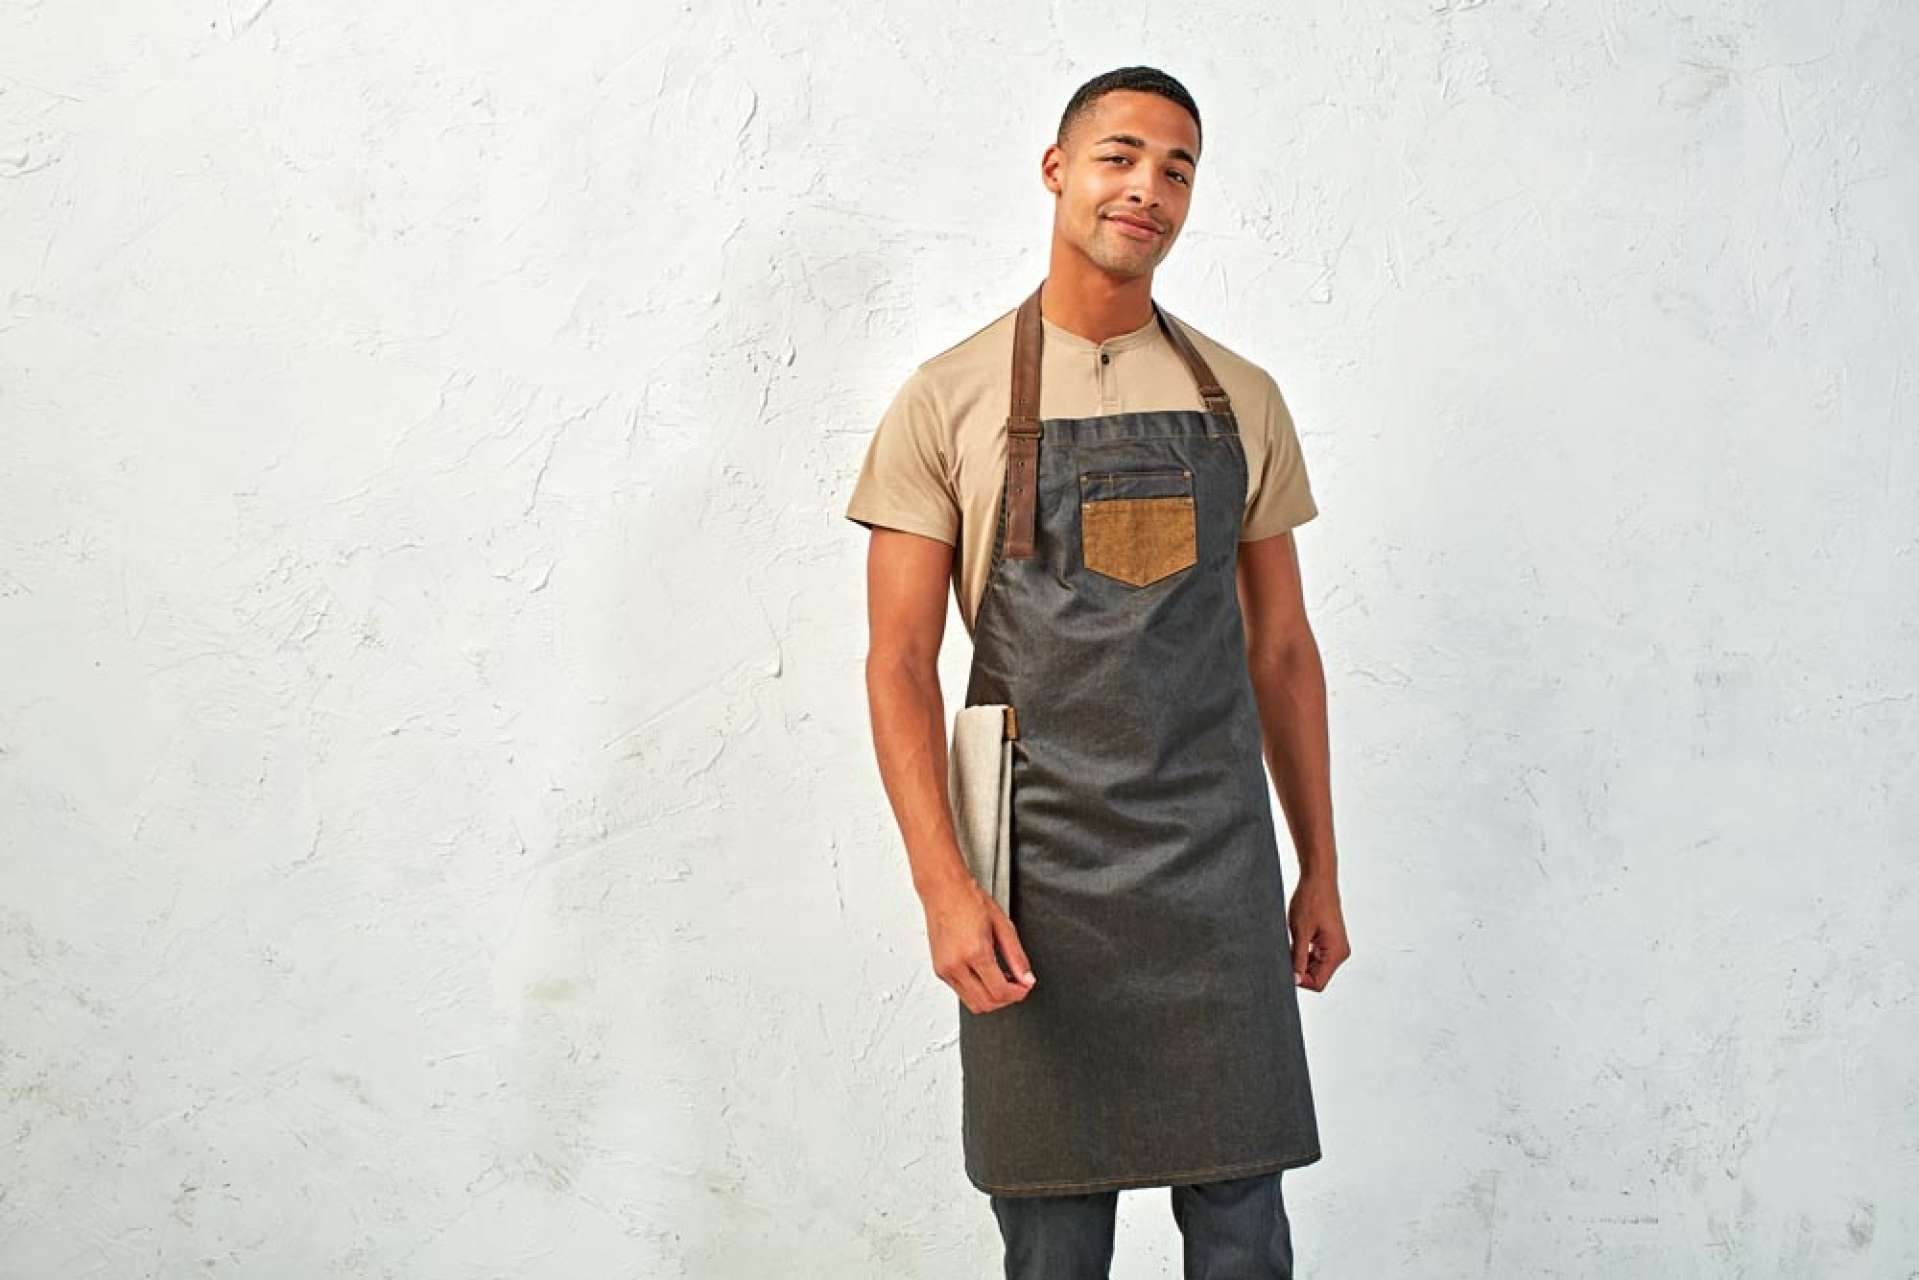 'DIVISION' WAXED LOOK DENIM BIB APRON WITH FAUX LEATHER